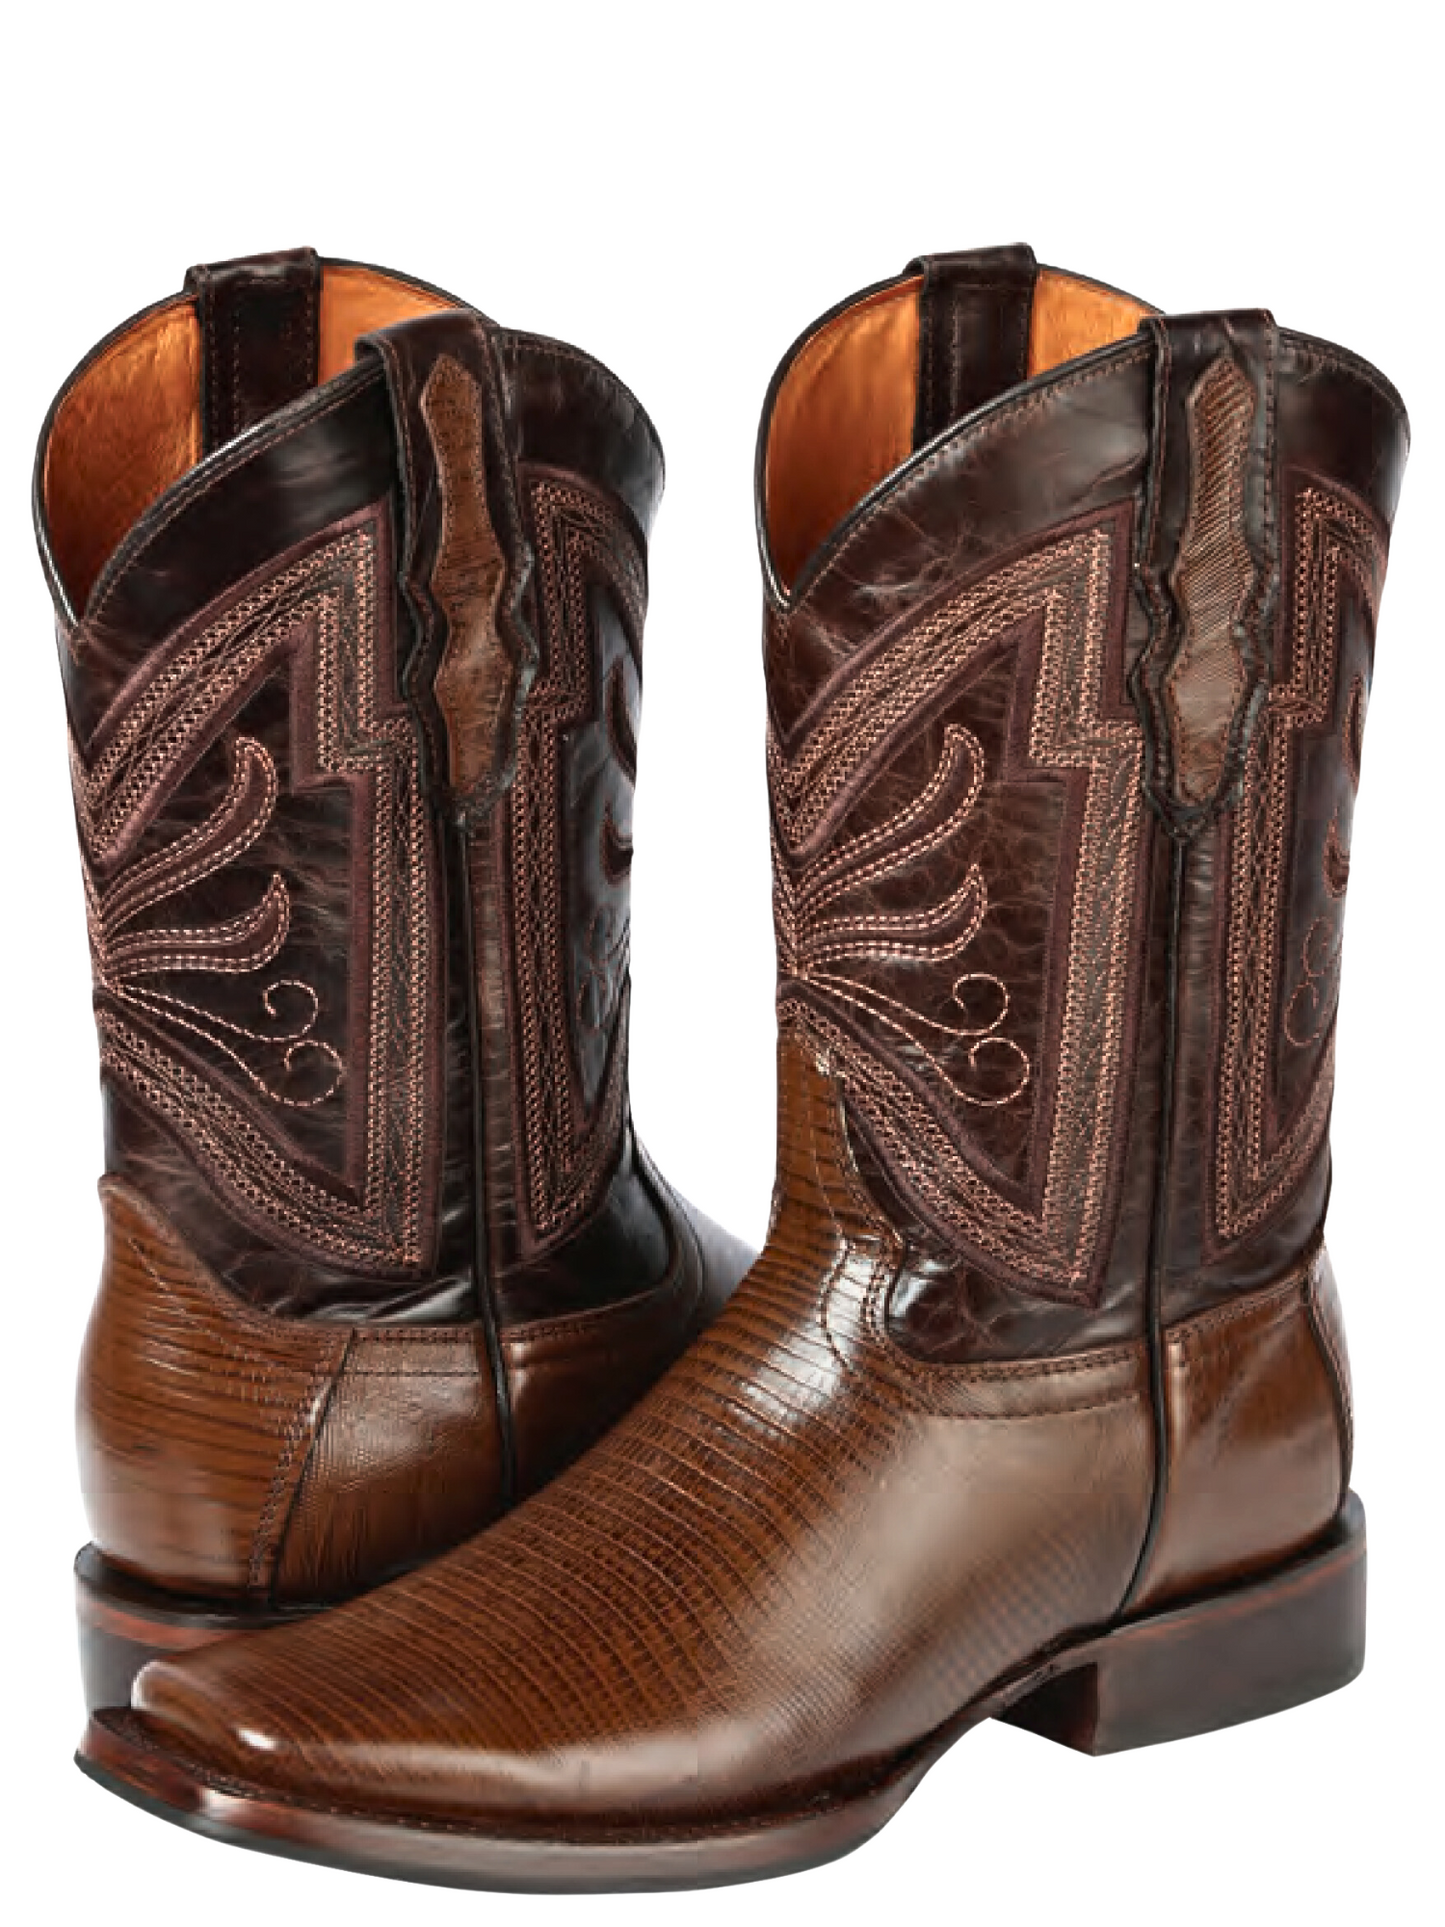 Rodeo Cowboy Boots Imitation of Lizard Engraved in Cowhide Leather for Men 'El General' - ID: 44674 Cowboy Boots El General